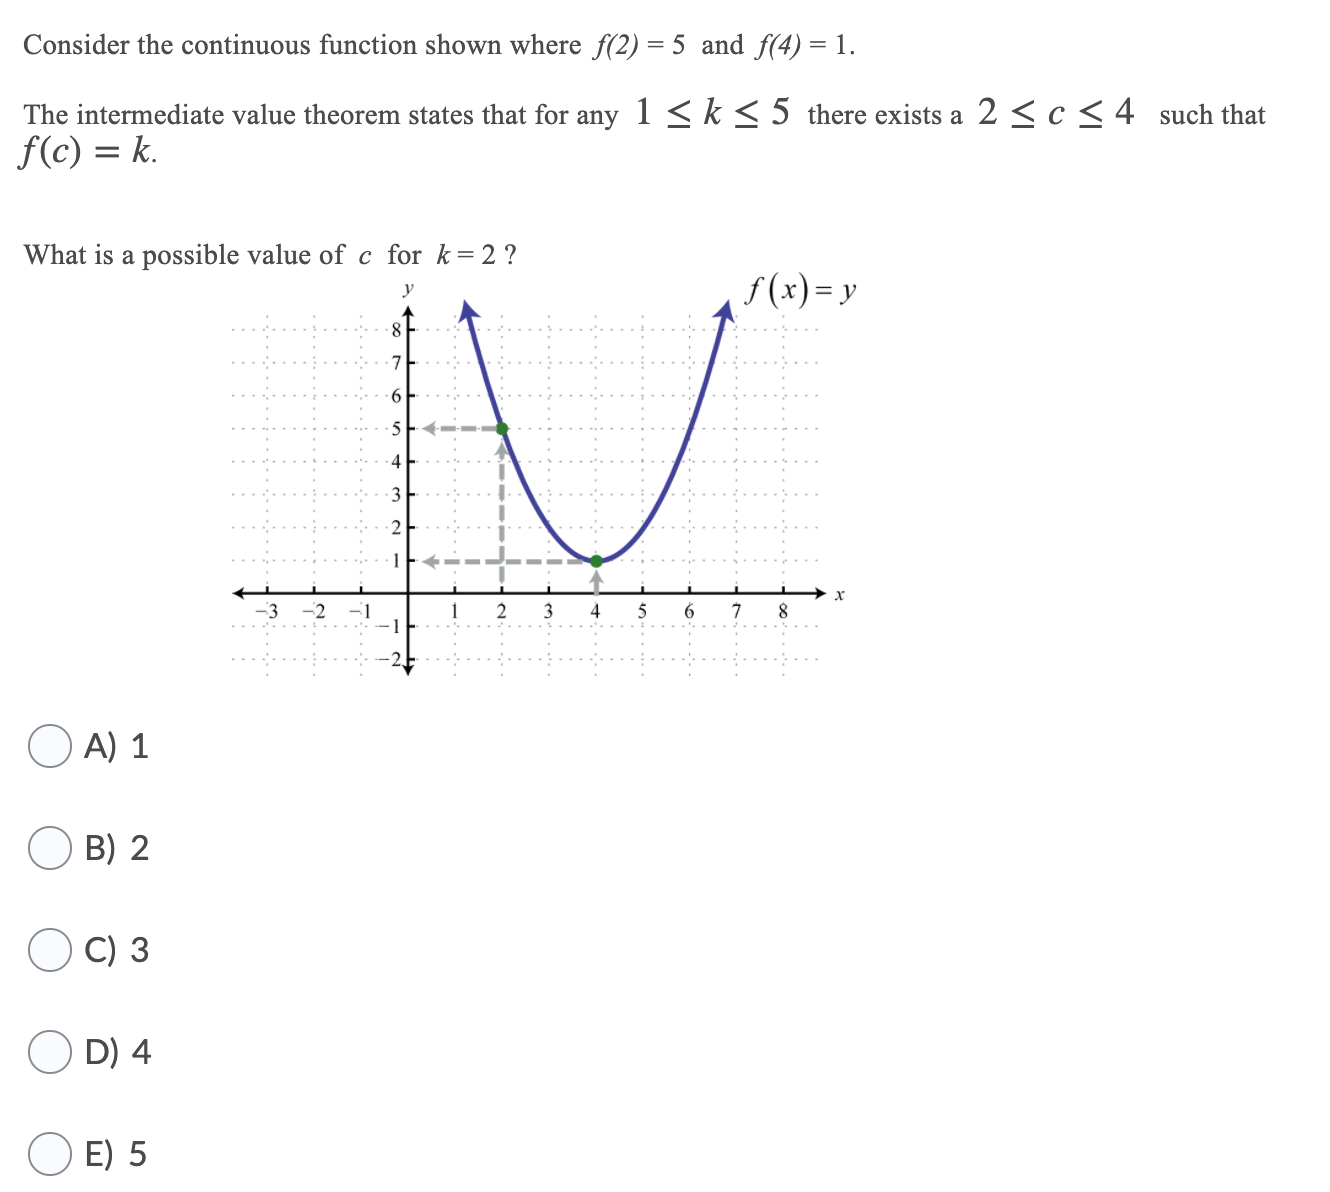 Consider the continuous function shown where f(2) = 5 and f(4) = 1.
The intermediate value theorem states that for any 1 < k < 5 there exists a 2 <c<4 such that
f(c) = k.
